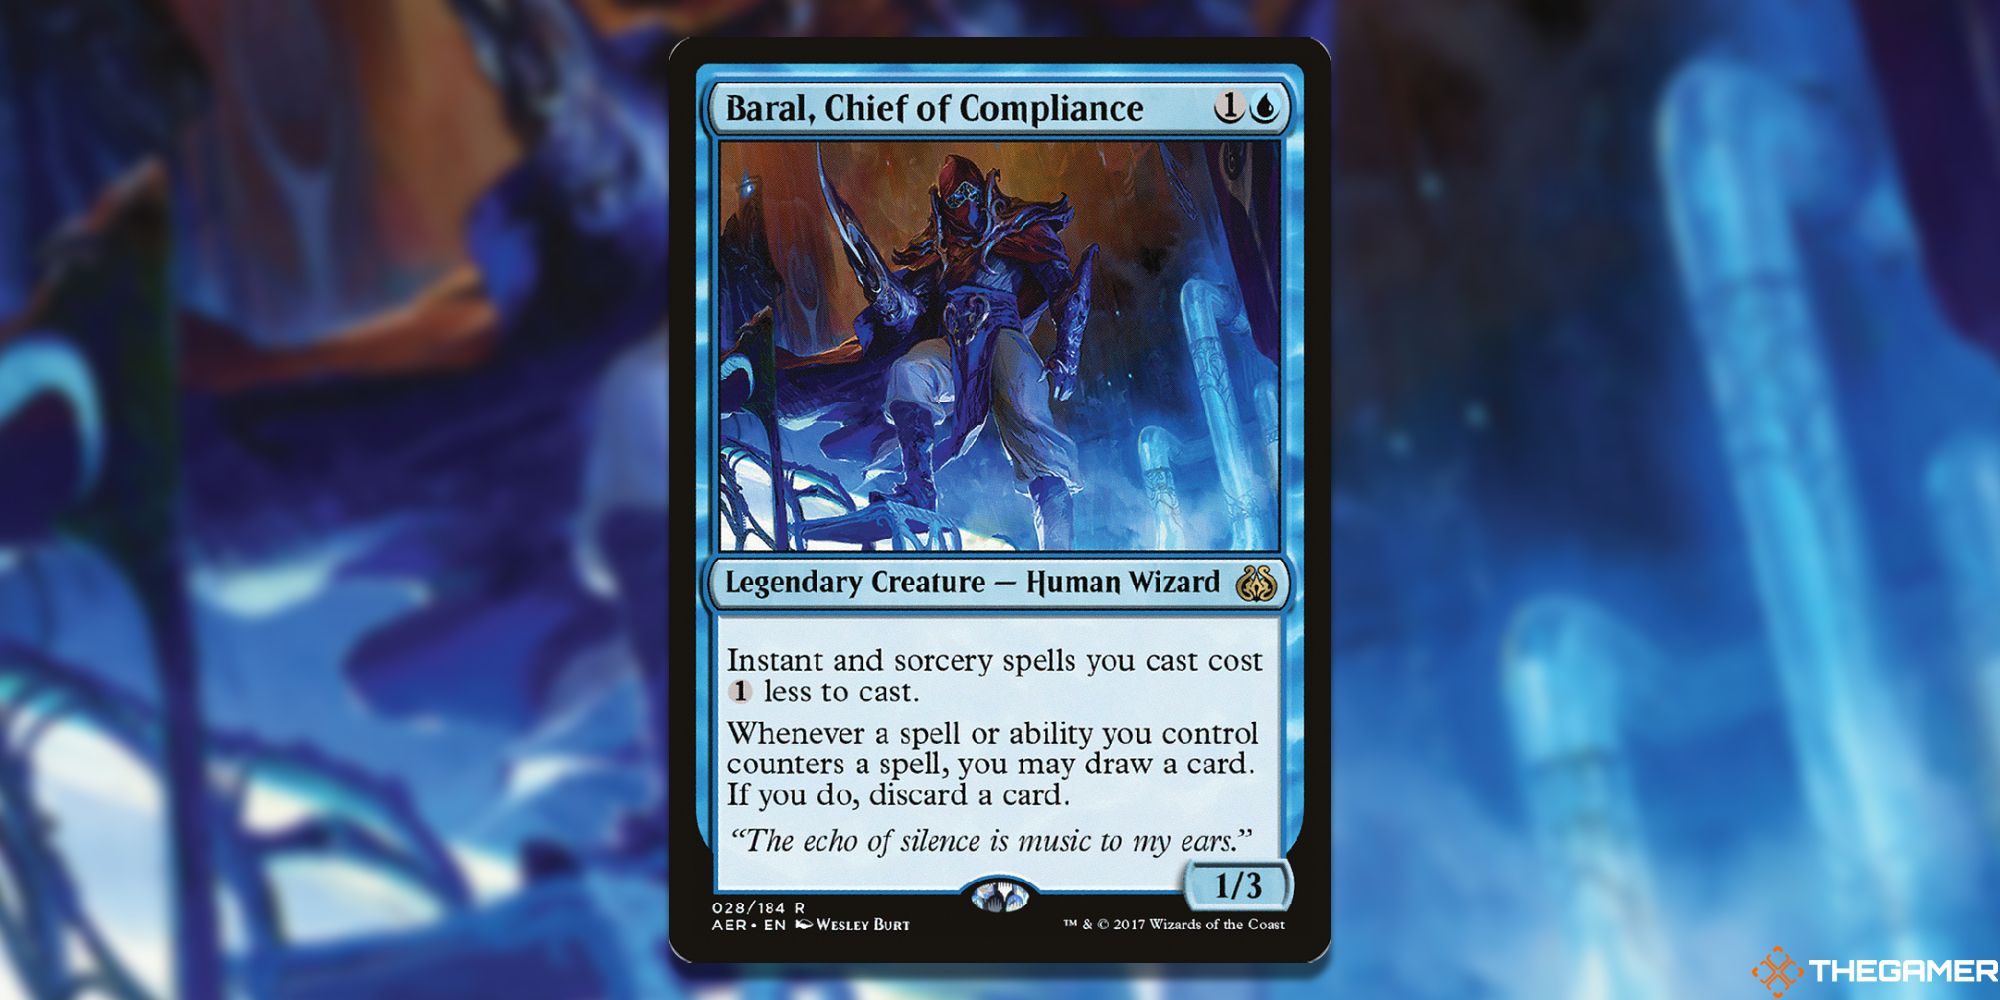 Image of the Baral, Chief of Compliance card in Magic: The Gathering, with art by Wesley Burt